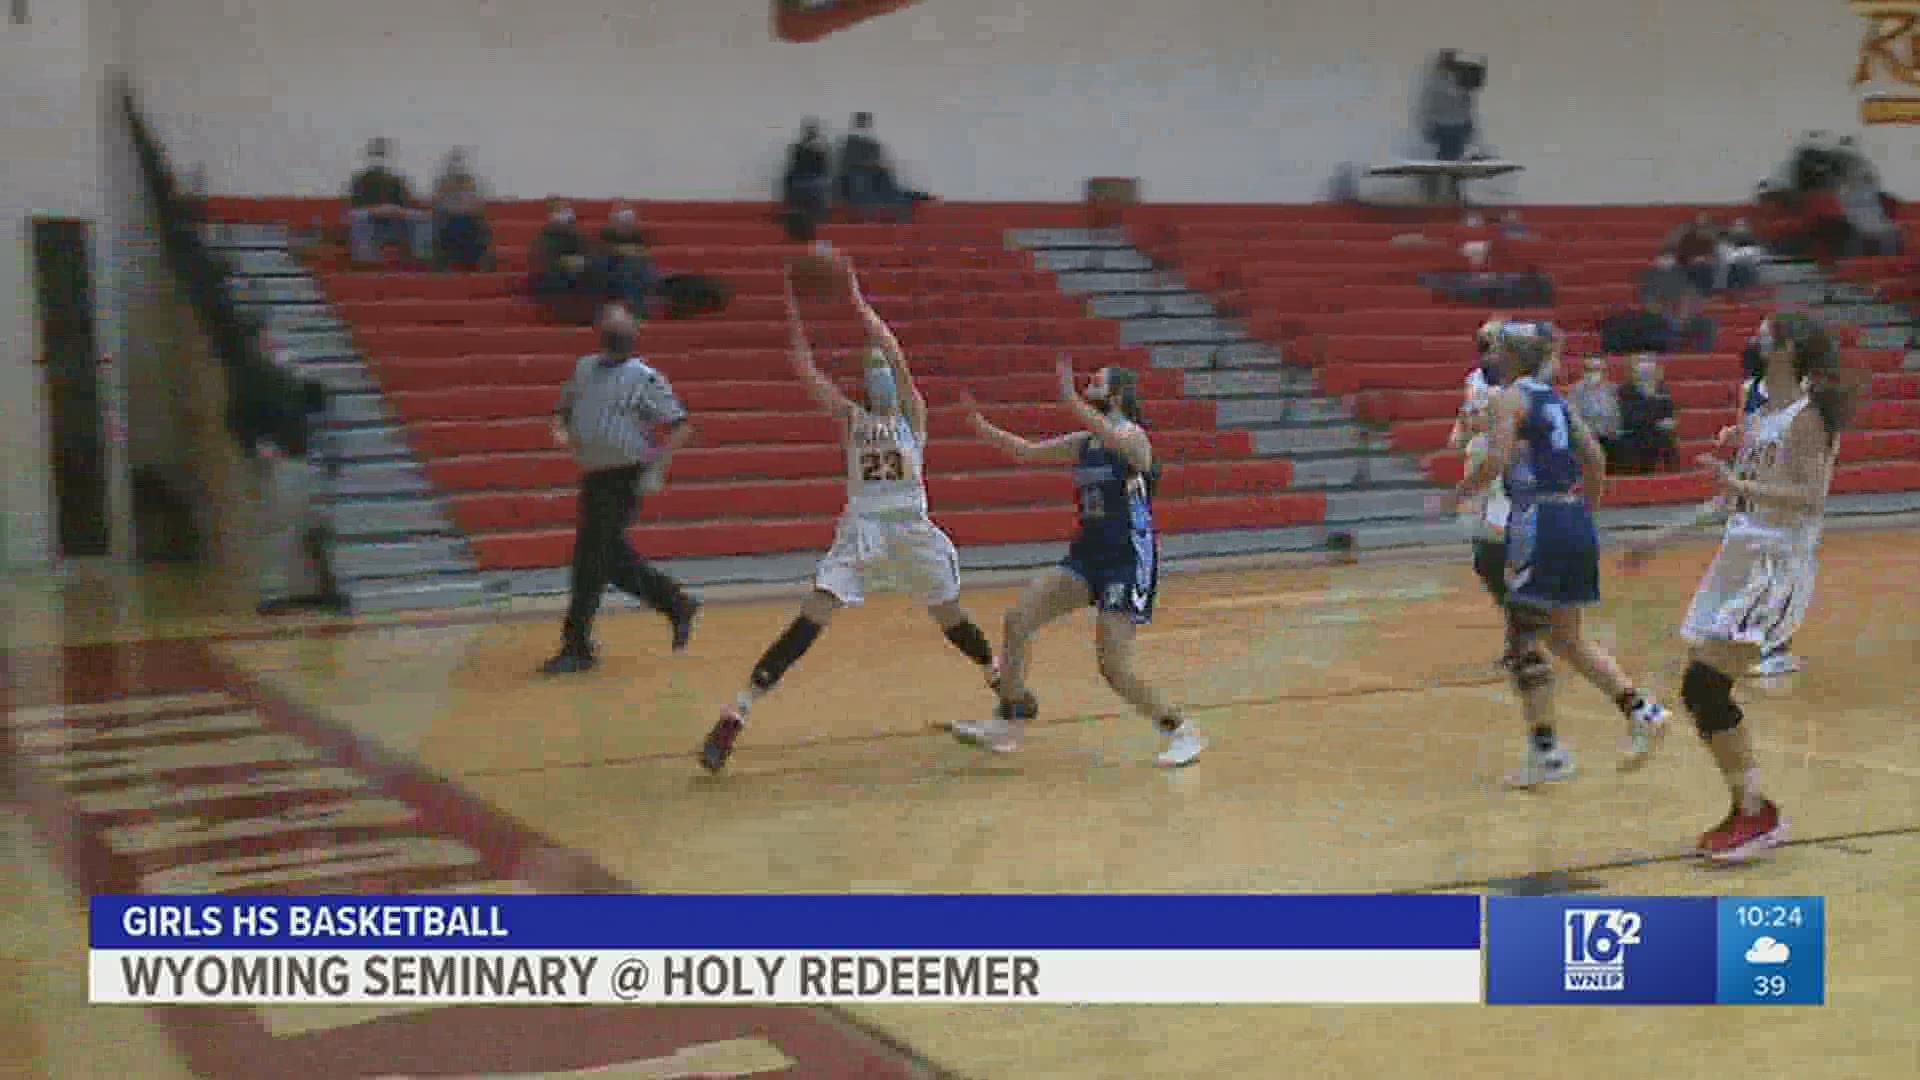 Holy Redeemer romps over Wyoming Seminary 55-32 in girls HS basketball